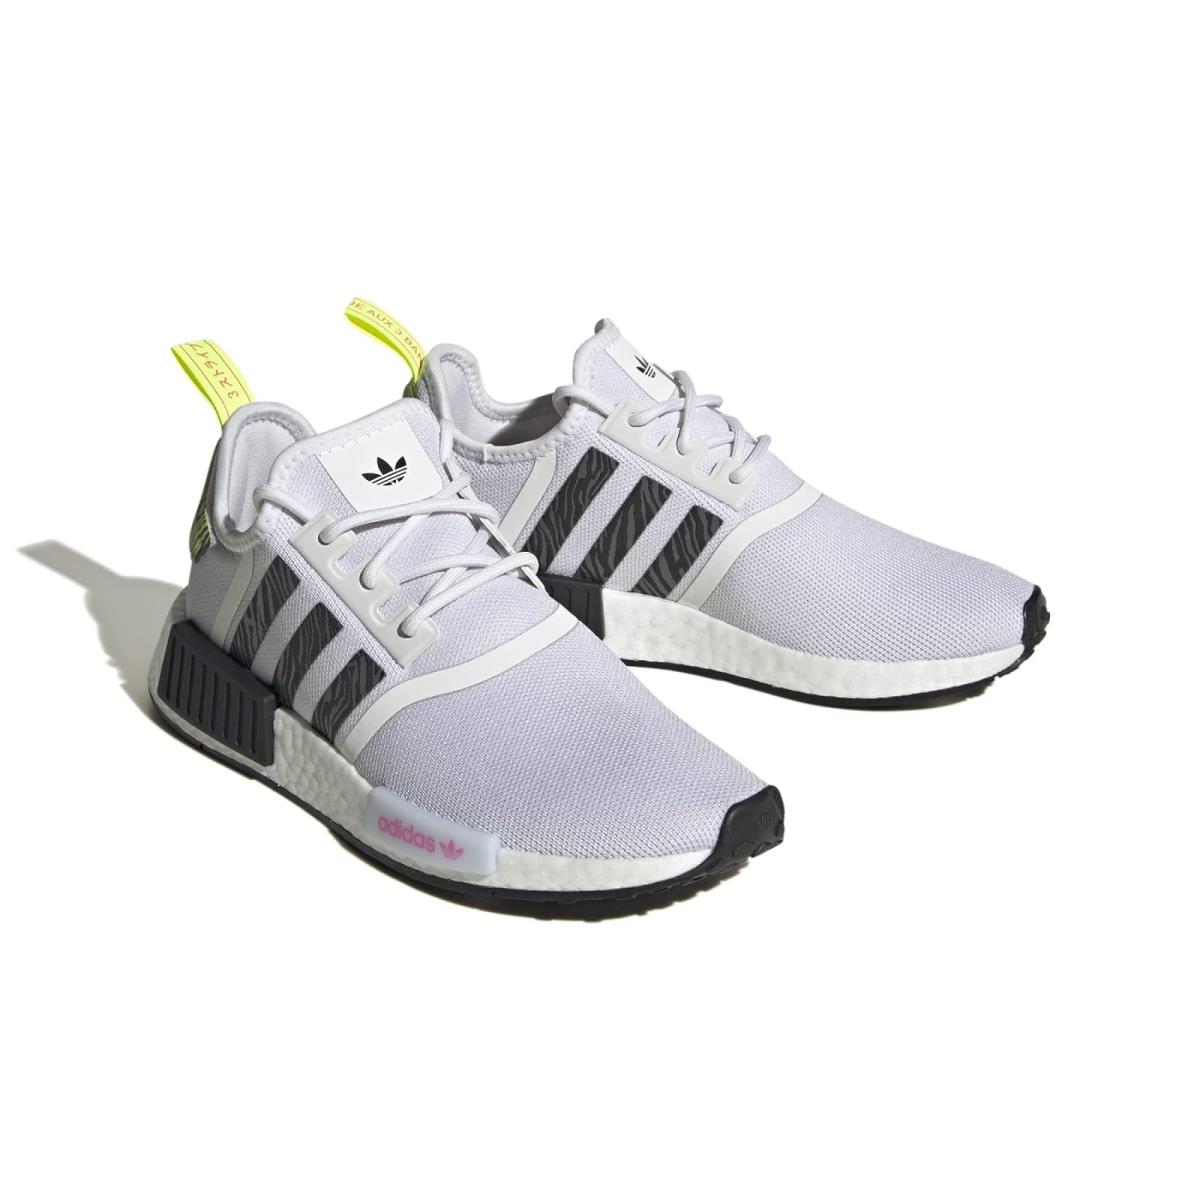 Woman`s Sneakers Athletic Shoes Adidas Originals NMD_R1 White/Core Black/Solar Yellow